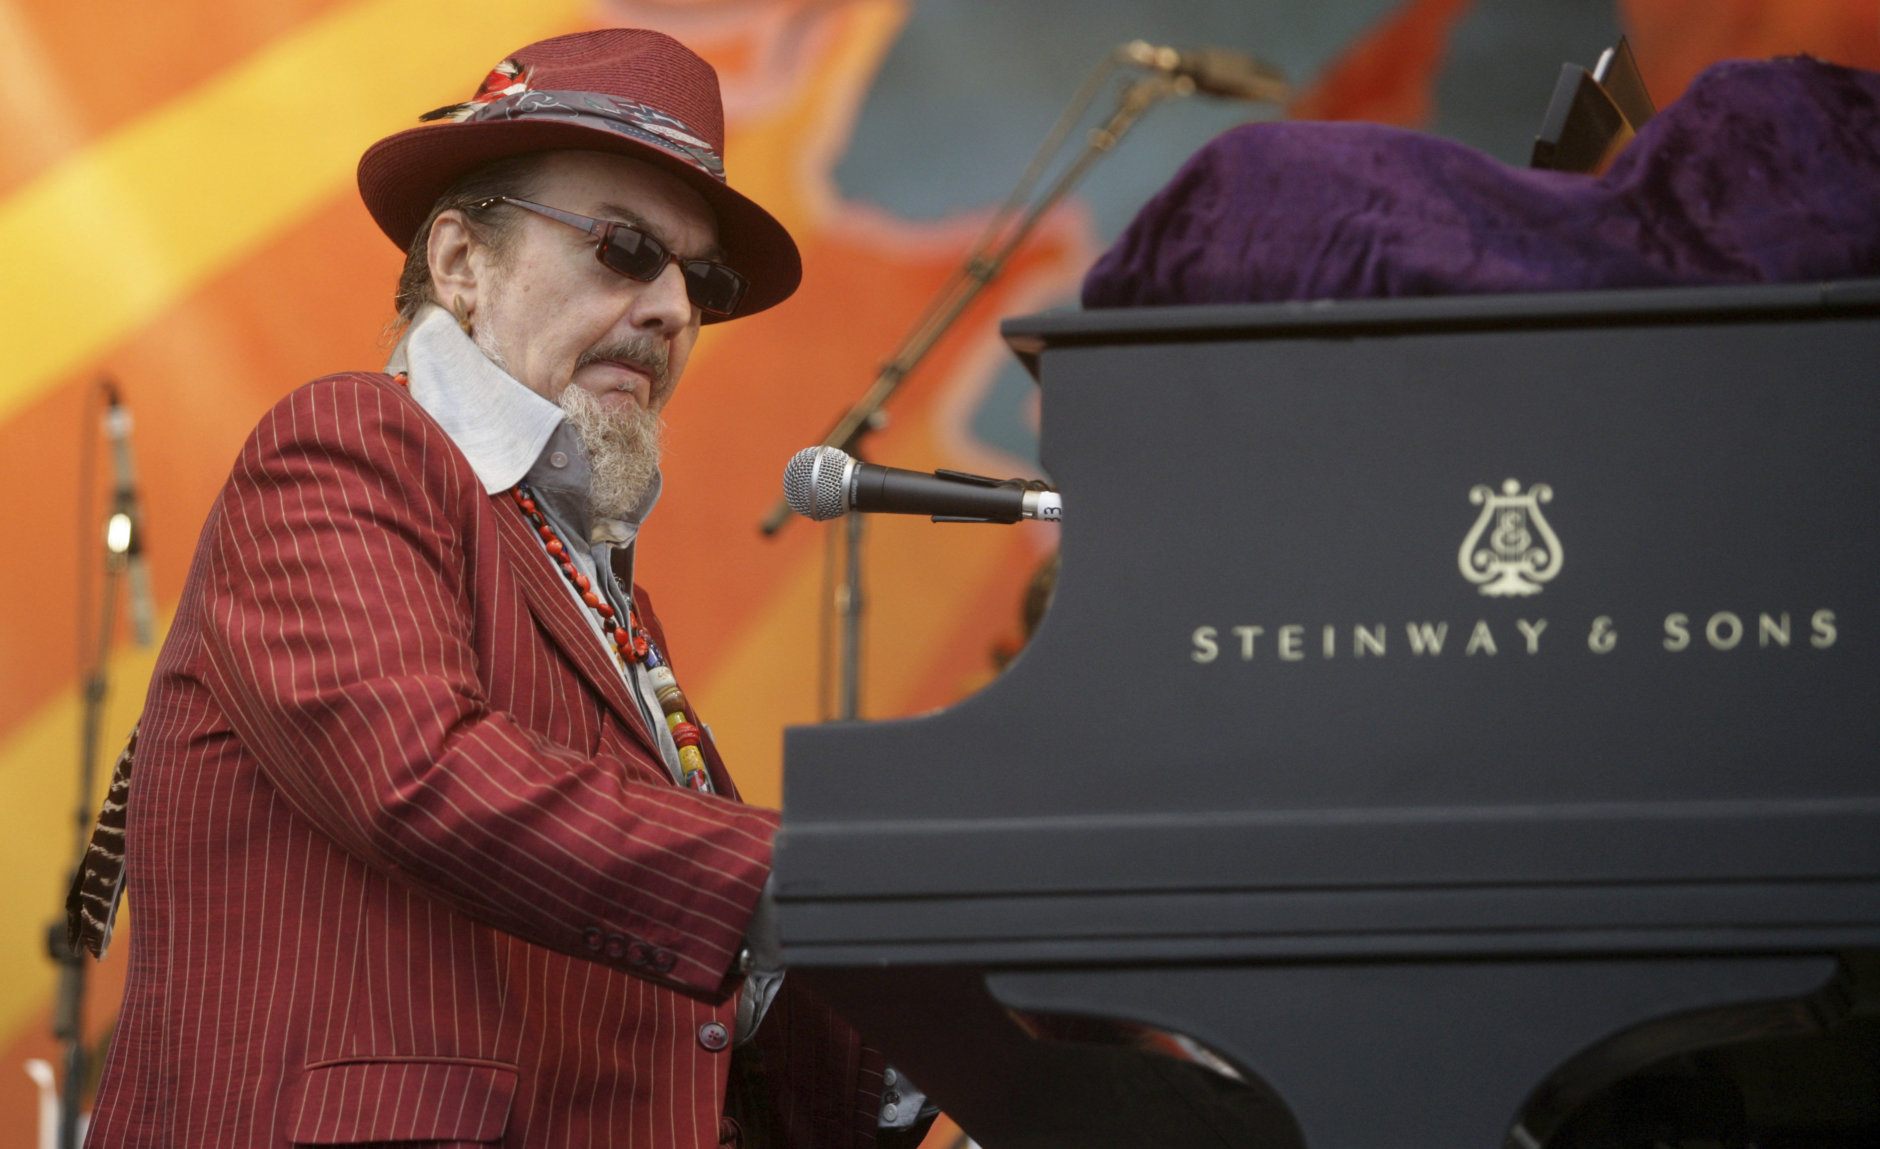 FILE - In this April 26, 2008 file photo, Dr. John performs during the 2008 New Orleans Jazz &amp; Heritage Festival in New Orleans. The family of the Louisiana-born musician known as Dr. John says the celebrated singer and piano player who blended black and white musical influence with a hoodoo-infused stage persona and gravelly bayou drawl, has died. He was 77. A family statement released by his publicist says Dr. John, who was born Mac Rebennack, died early Thursday of a heart attack. (AP Photo/Dave Martin, File)